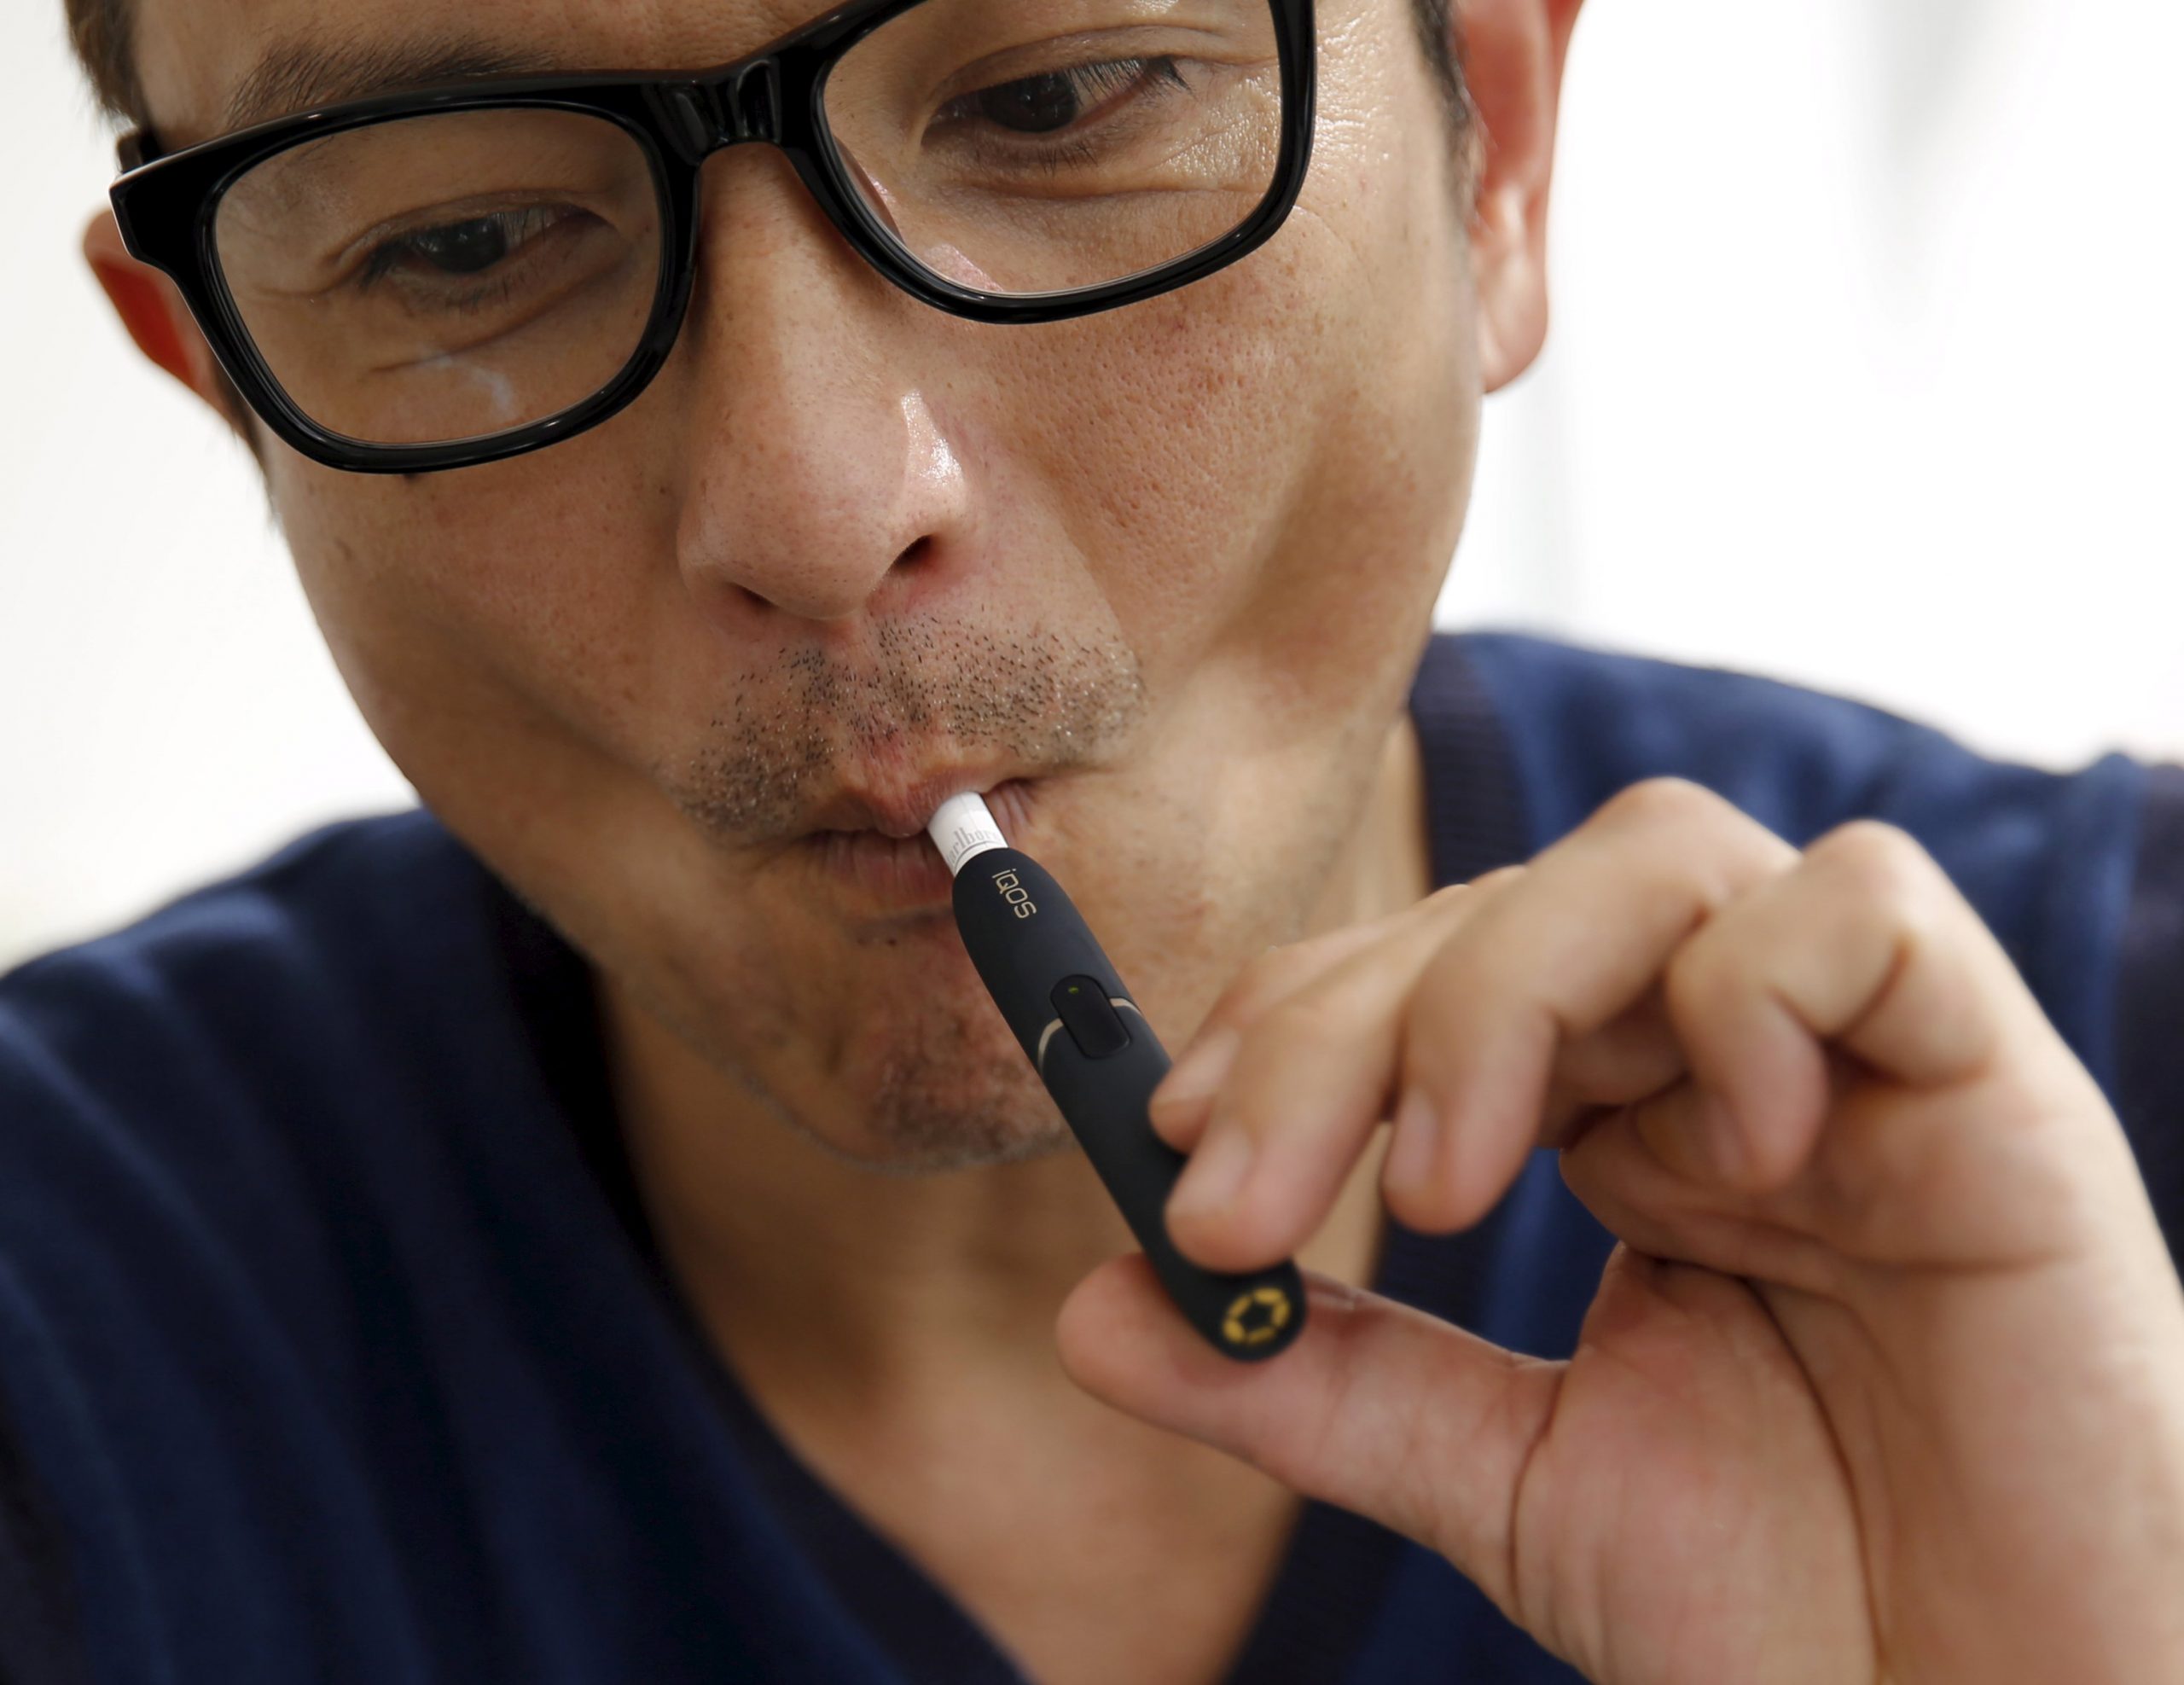 Smoke Without Fire? Researchers Question Heated Tobacco Products